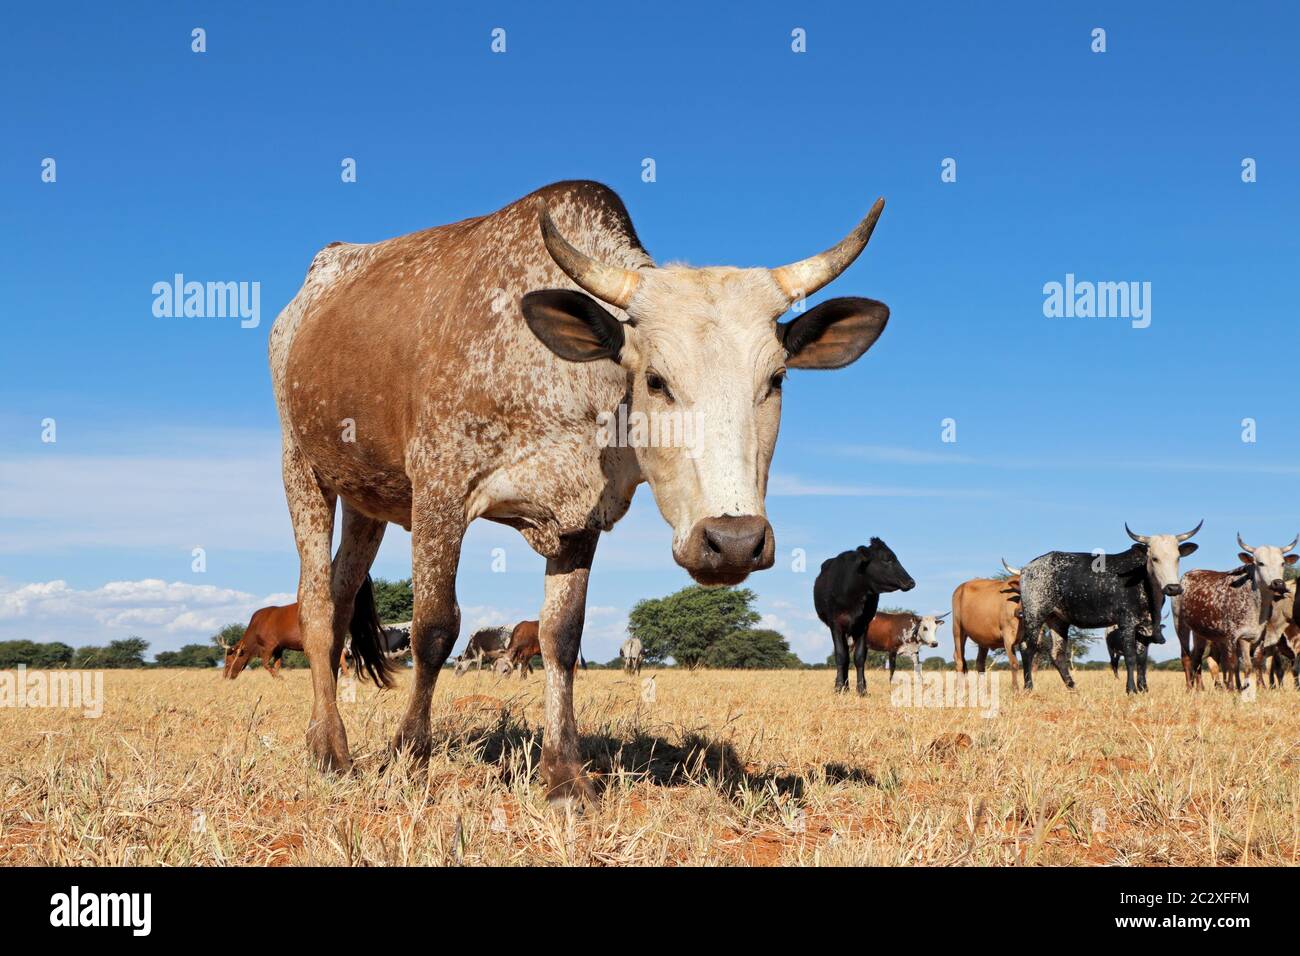 Nguni cow - indigenous cattle breed of South Africa - on rural farm Stock Photo